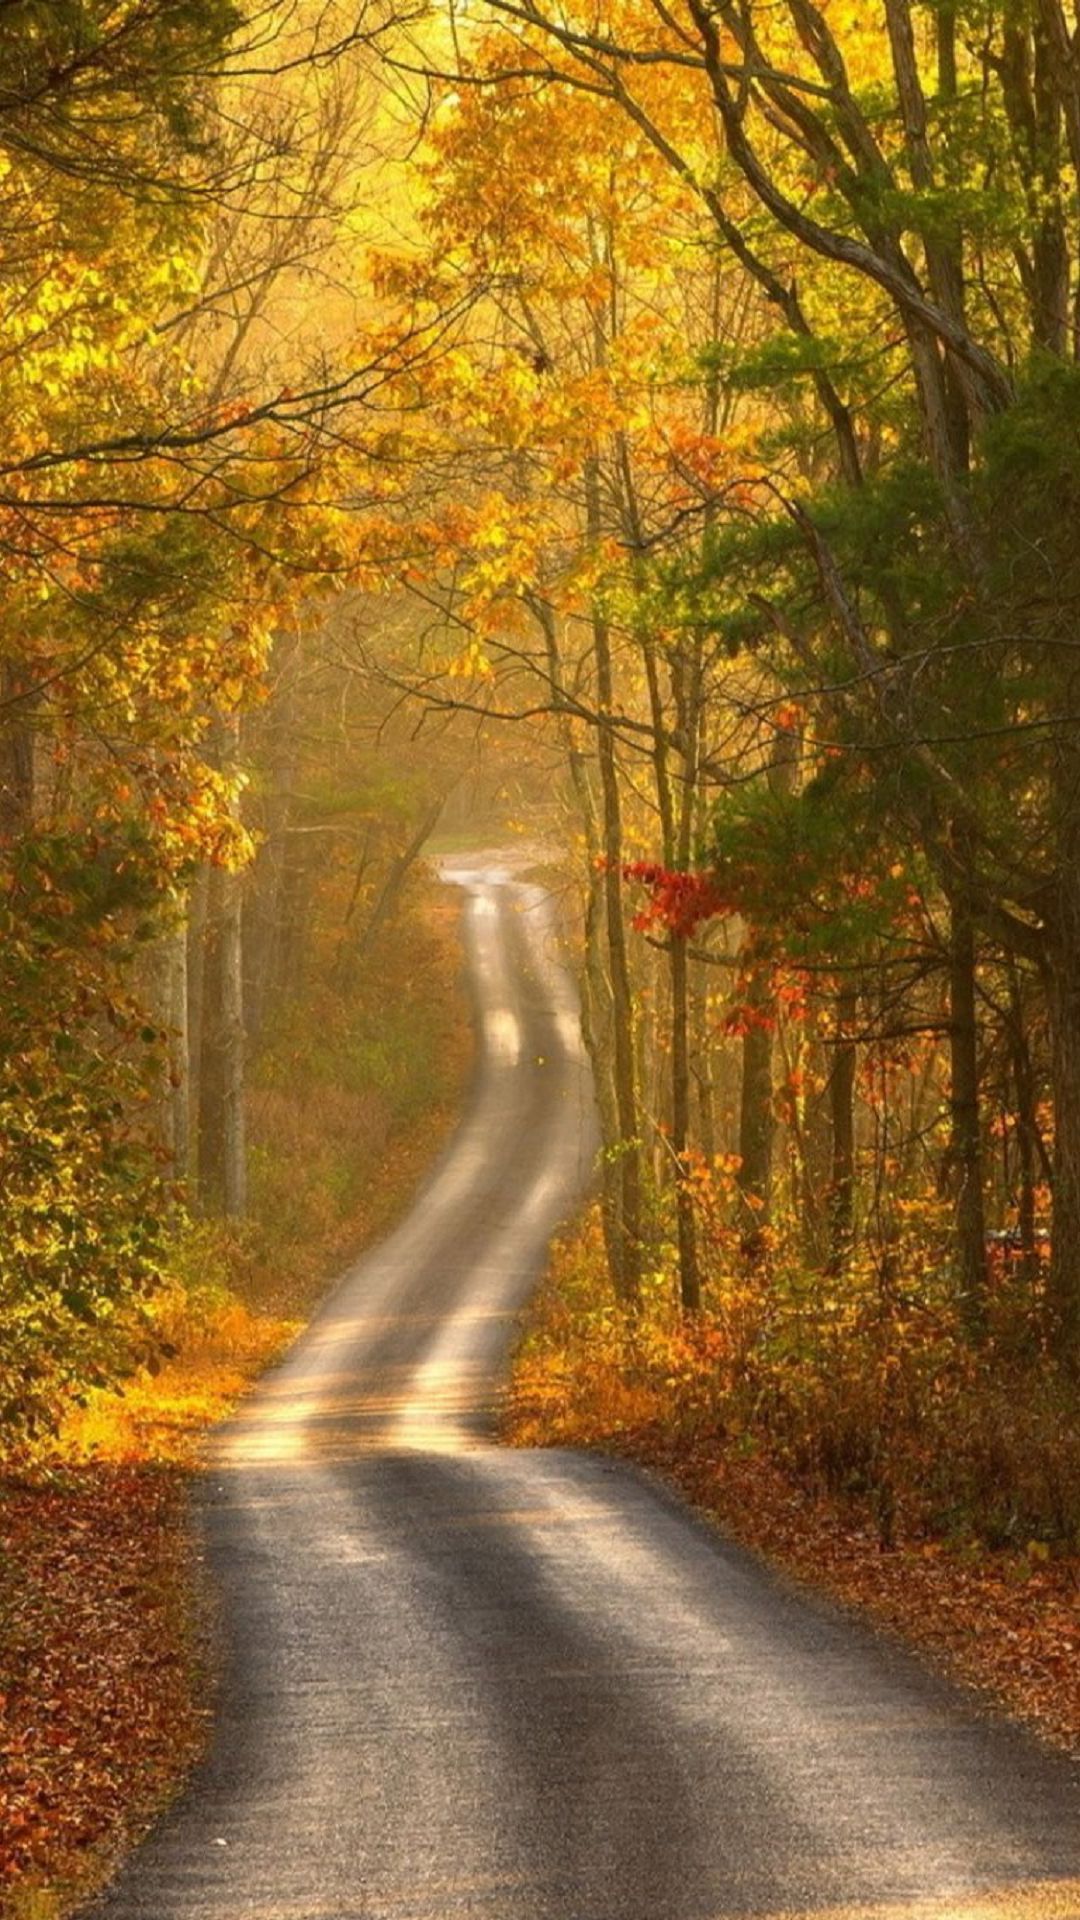 Autumn Forest Path Android Wallpaper free download